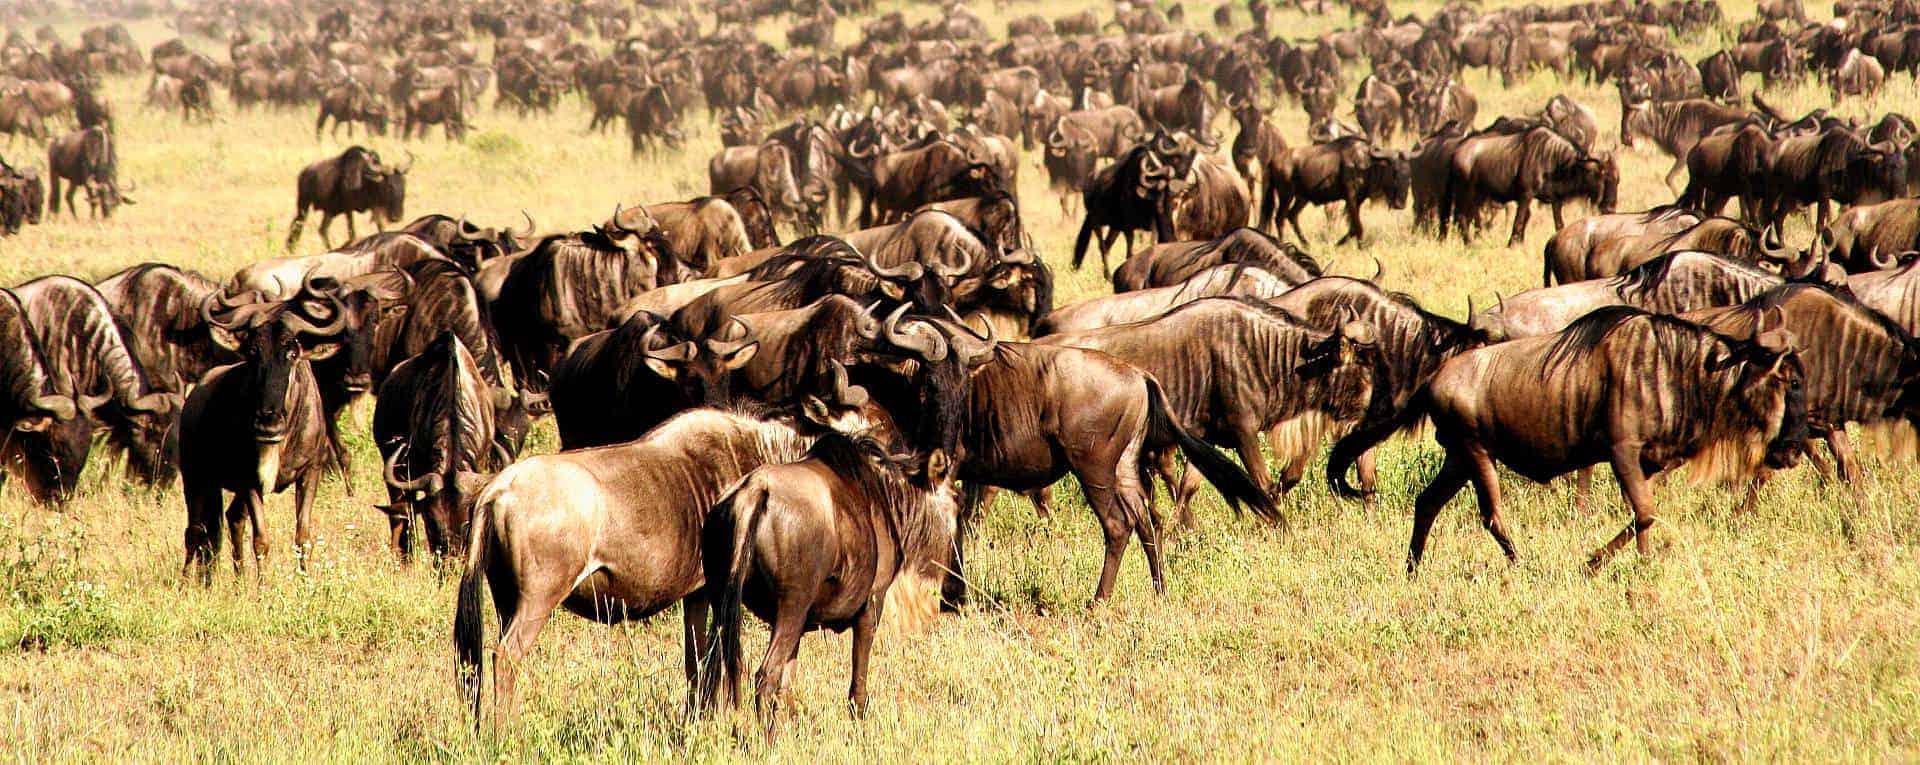 Where is the wildebeest Migration Now?